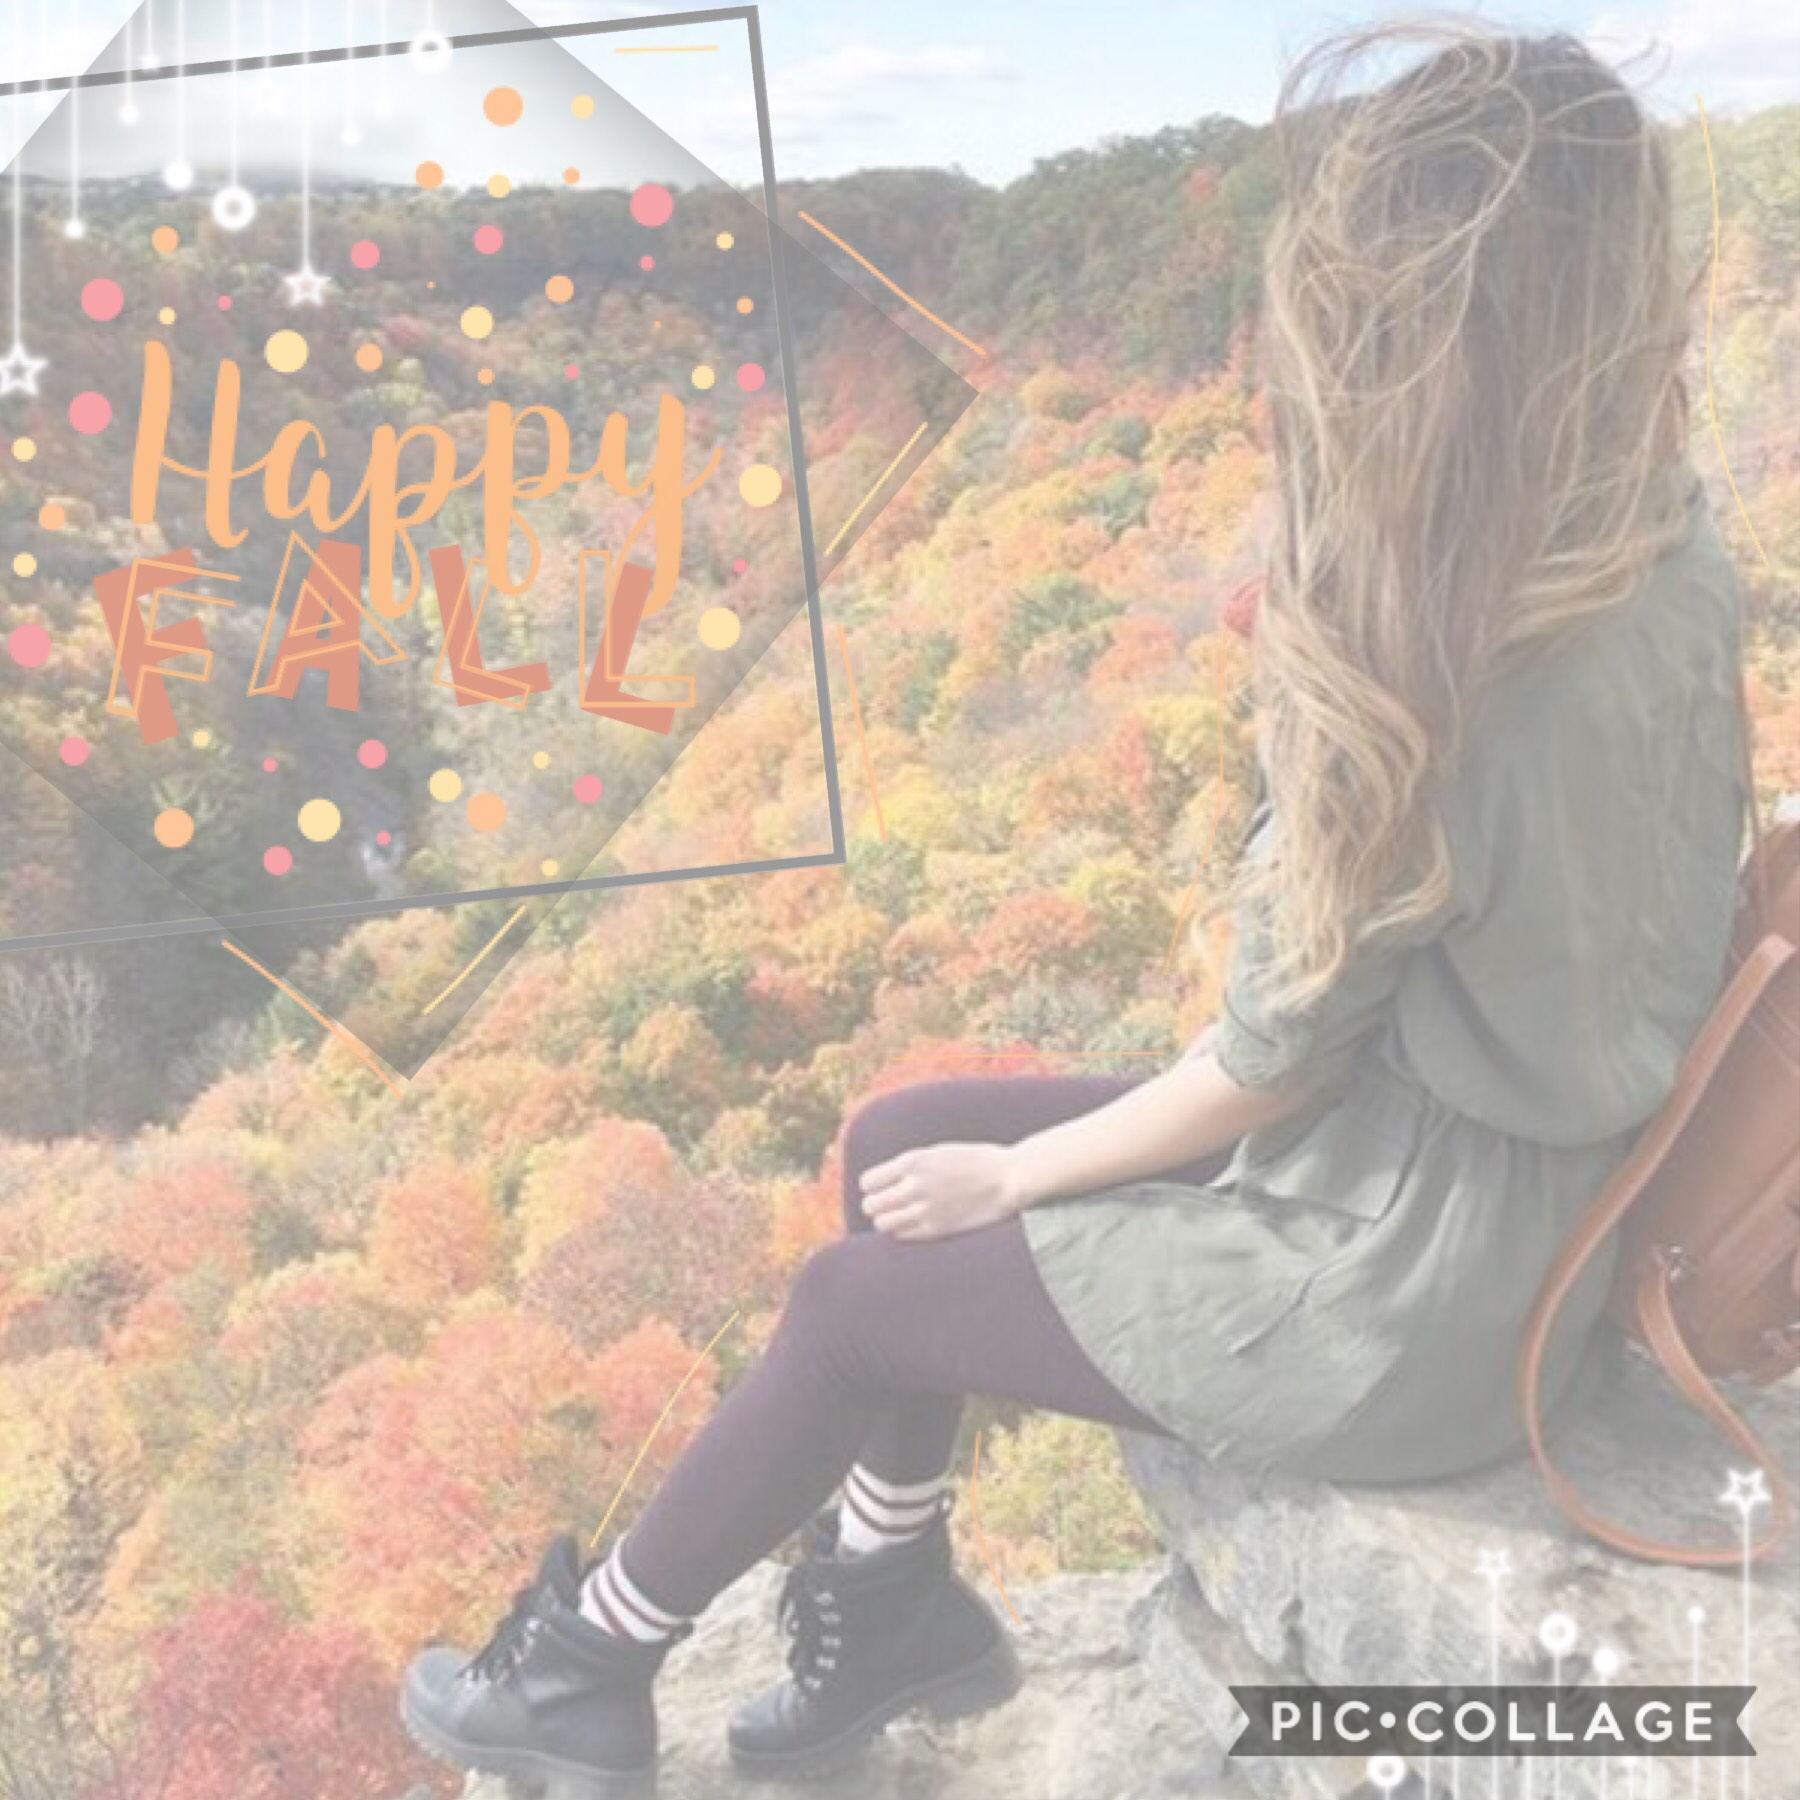 tap!!🍁🍁
Two posts😱It’s fall!!! I will be trying to post fall themed collages but no promises... QOTD: Favorite holiday? AOTD: CHRISTMAS!!! I just love all the decorations and movies and songs and Christmas trees and and and everything😂